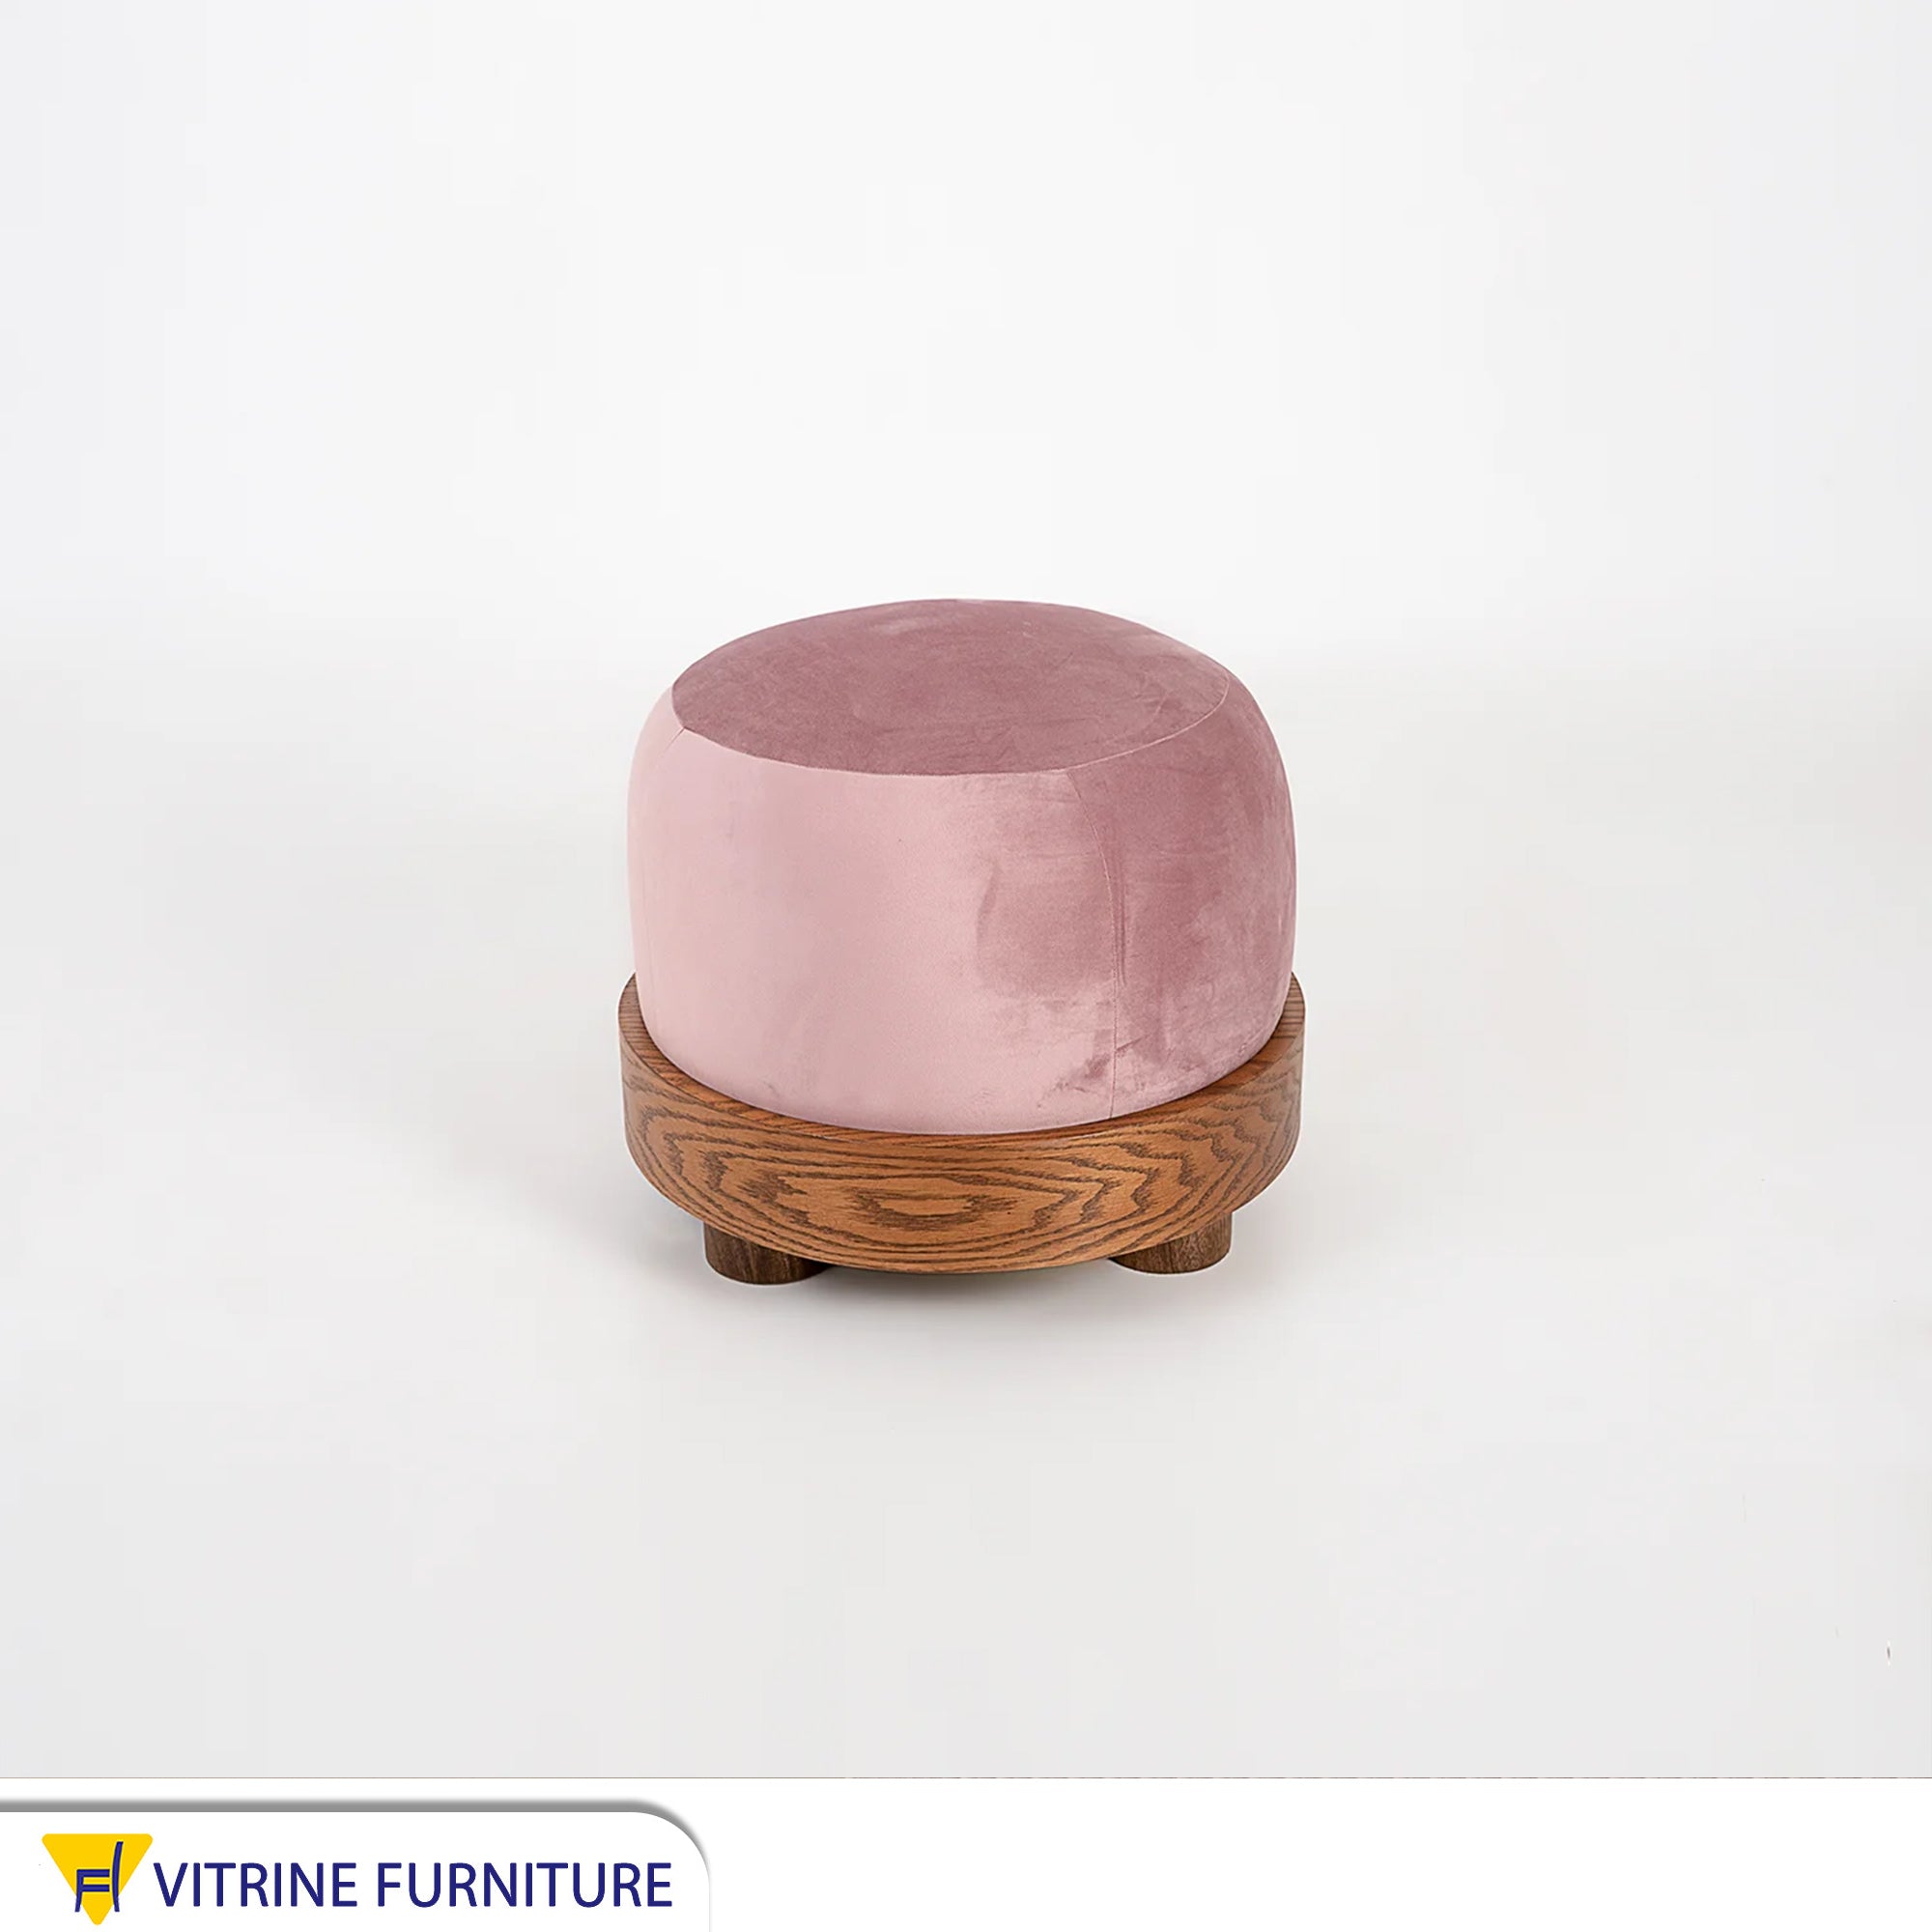 Pouf with wooden base